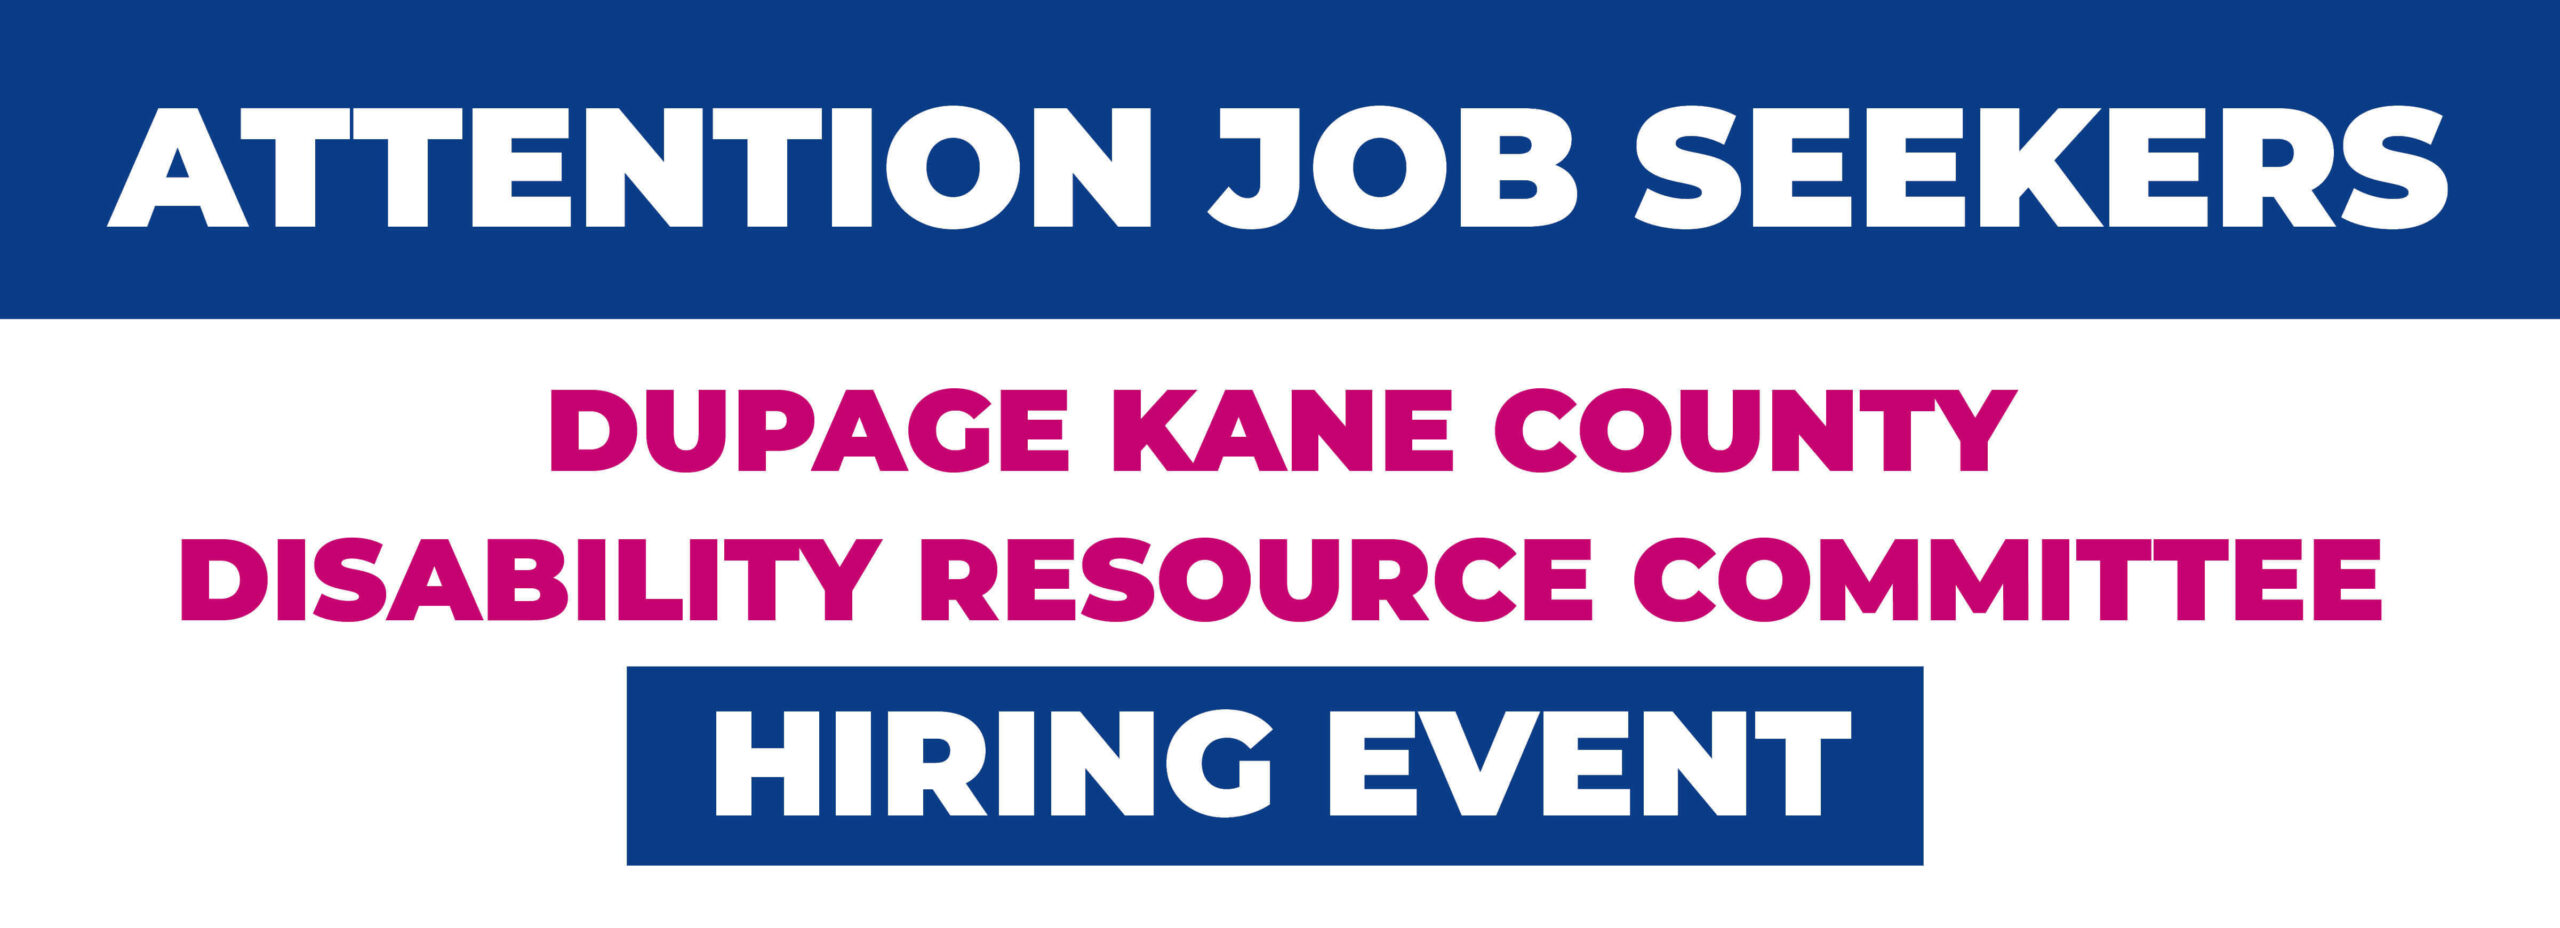 Attention Job Seekers: DuPage Kane County Disability Resource Committee Hiring Event